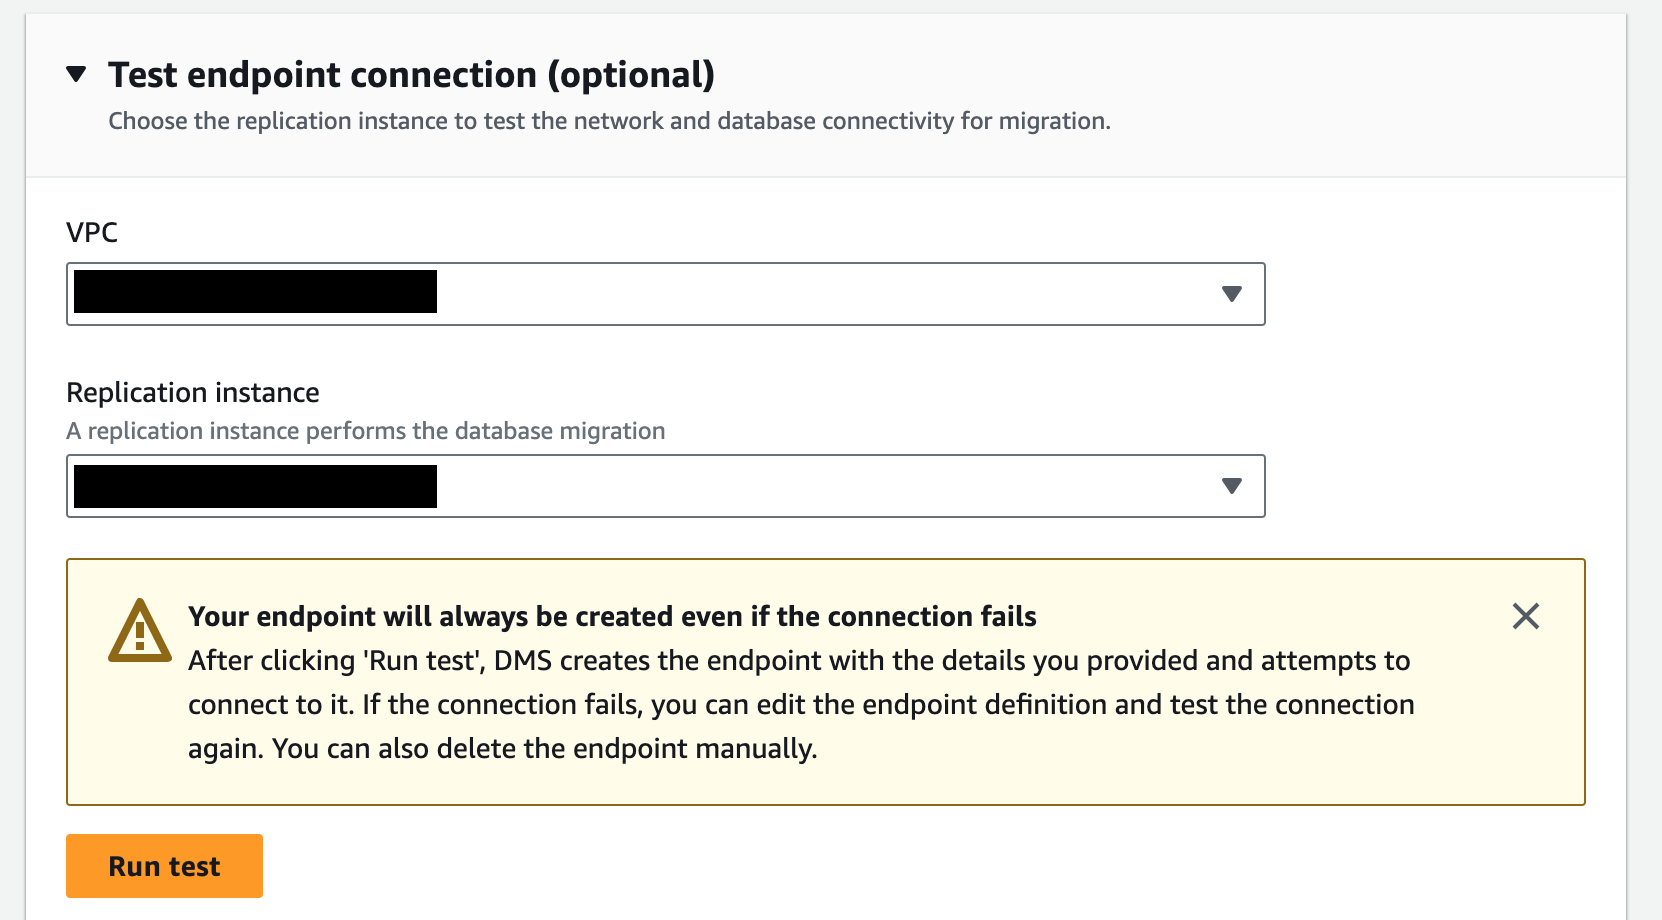 Test endpoint connection